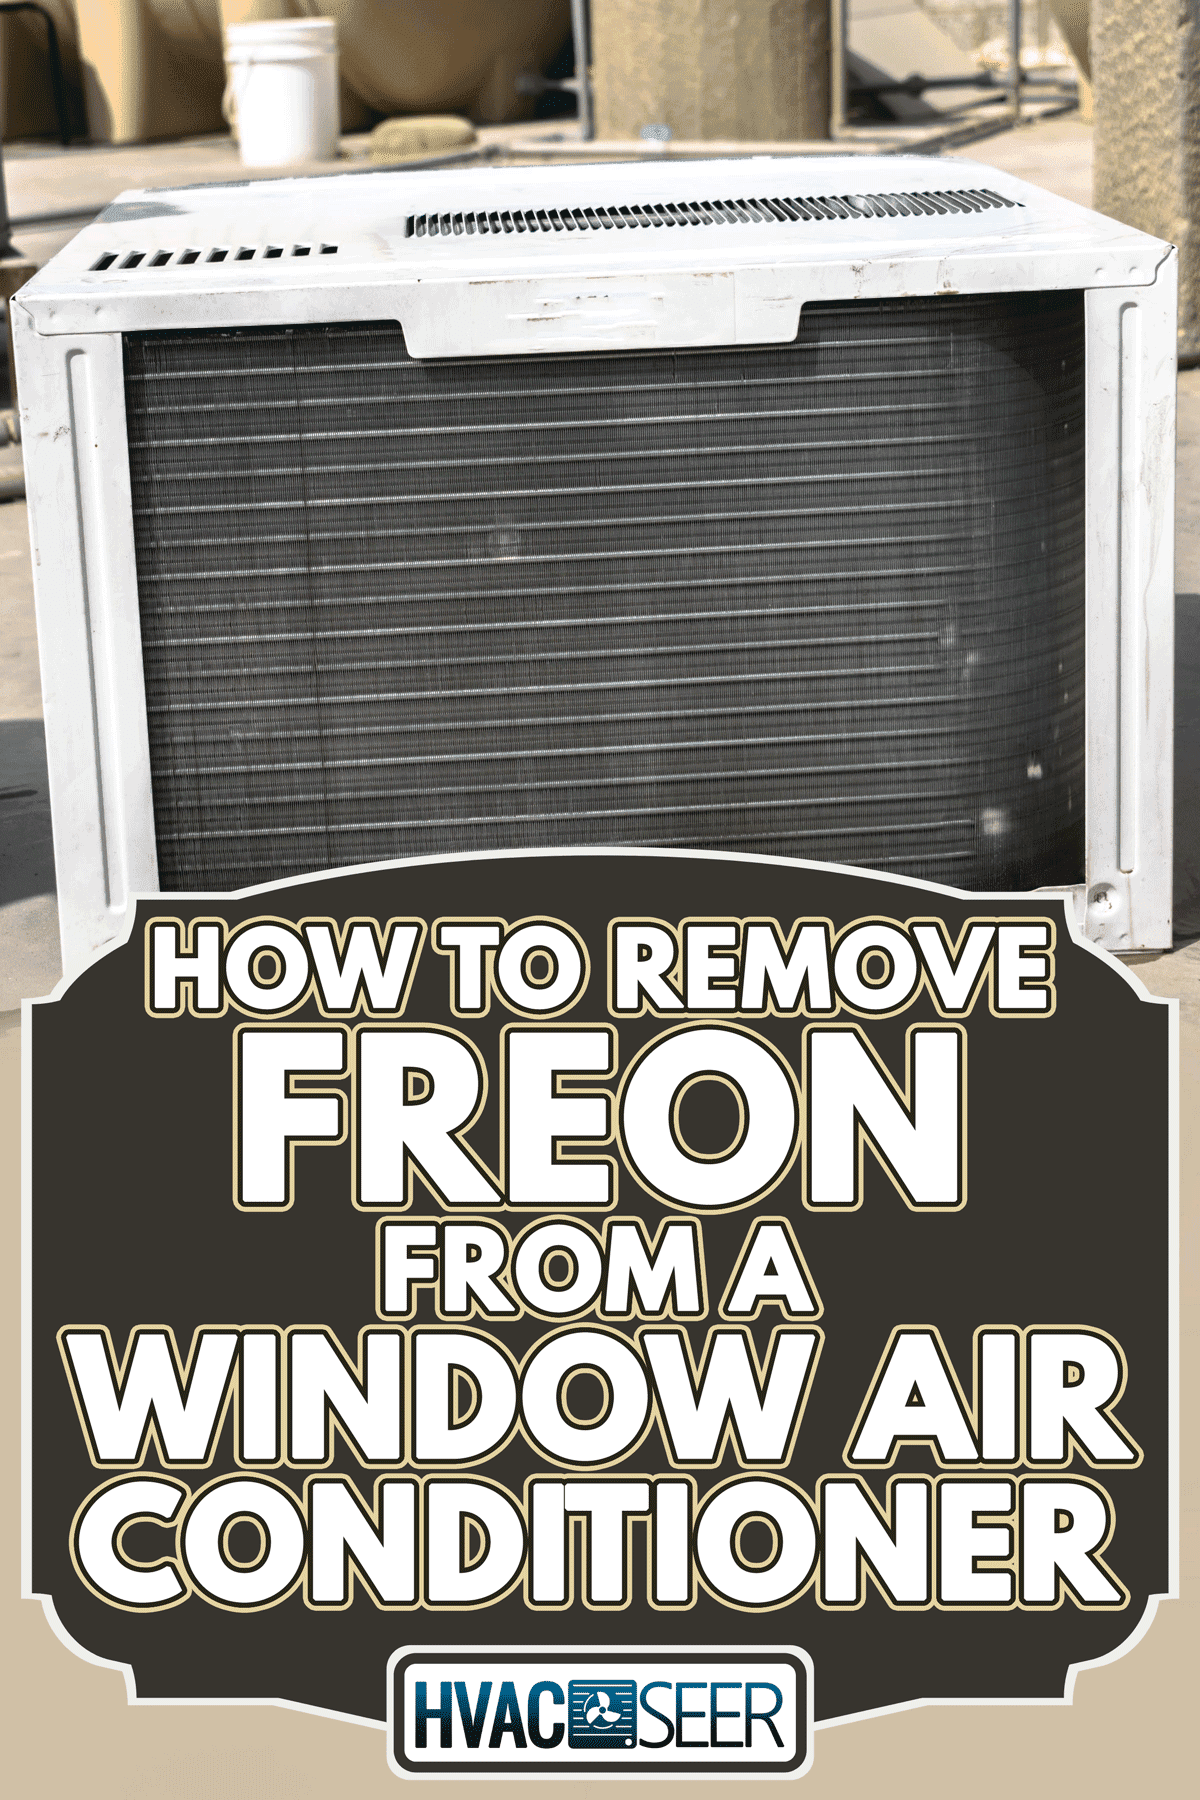 Window air conditioner looks so clean after the cleaning service, How To Remove Freon From A Window Air Conditioner